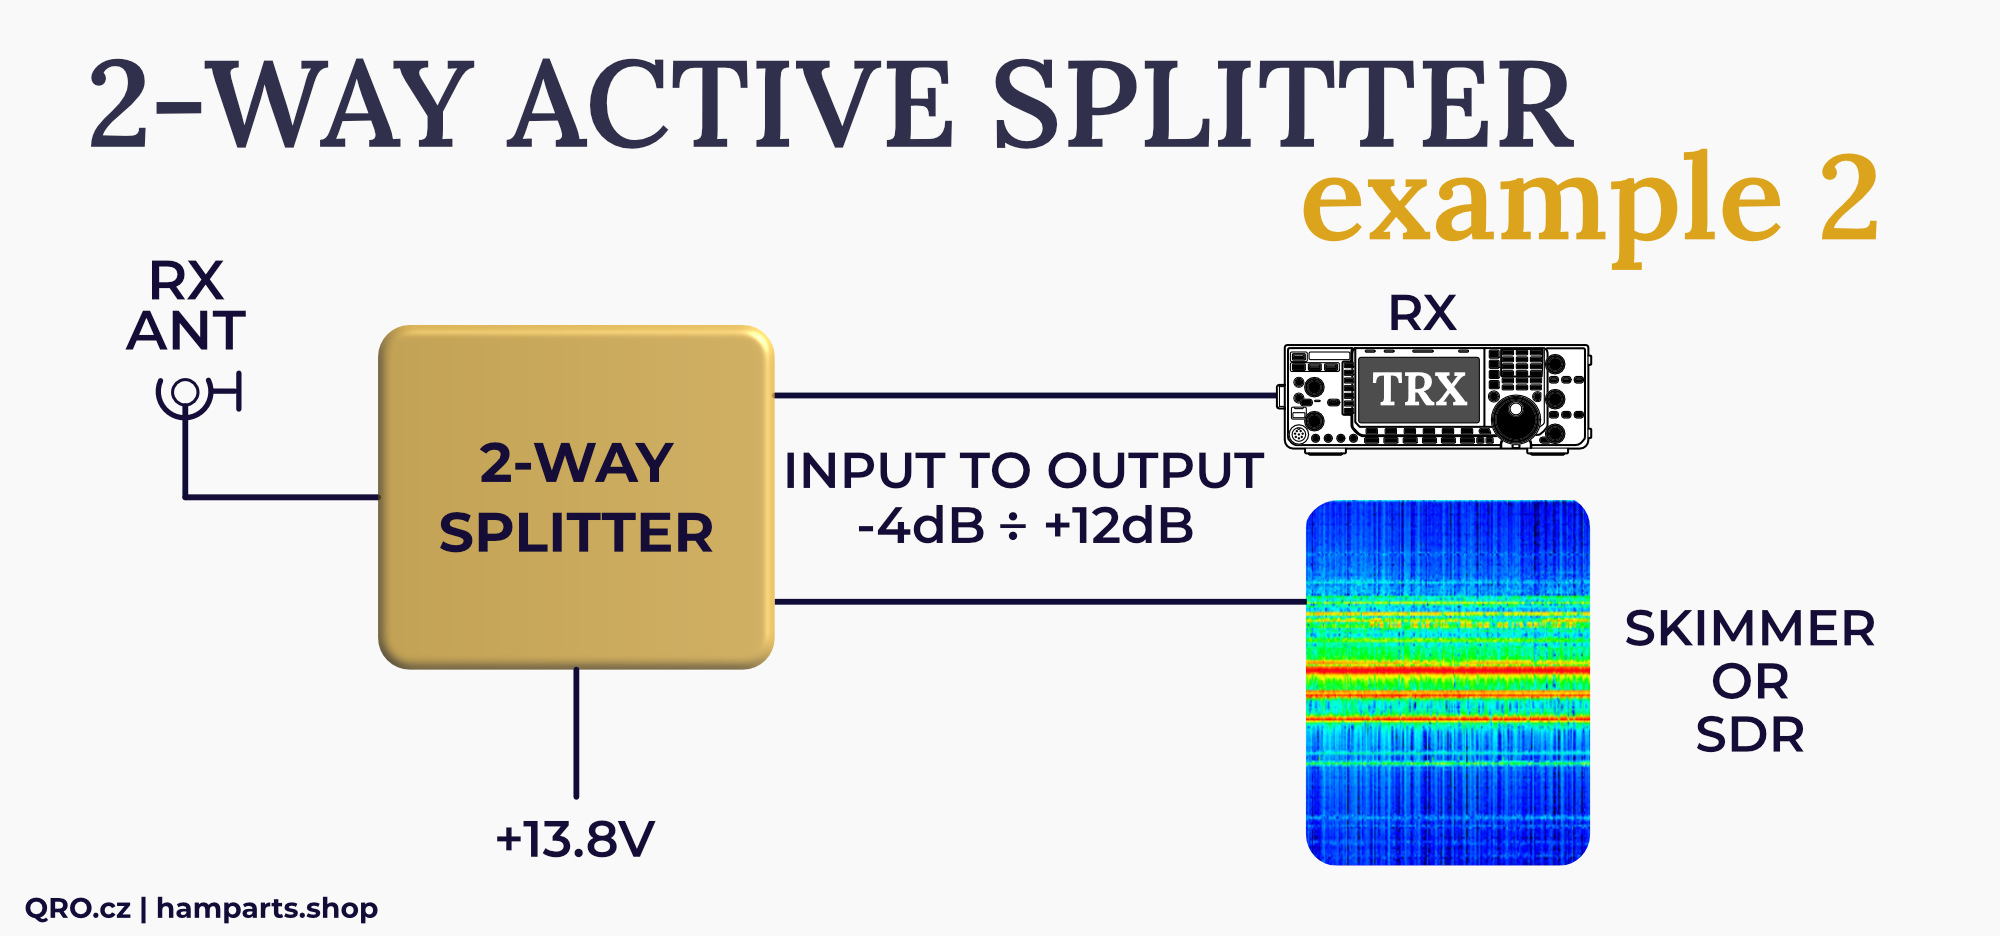 2way active splitter example by qro.cz hamparts.shop